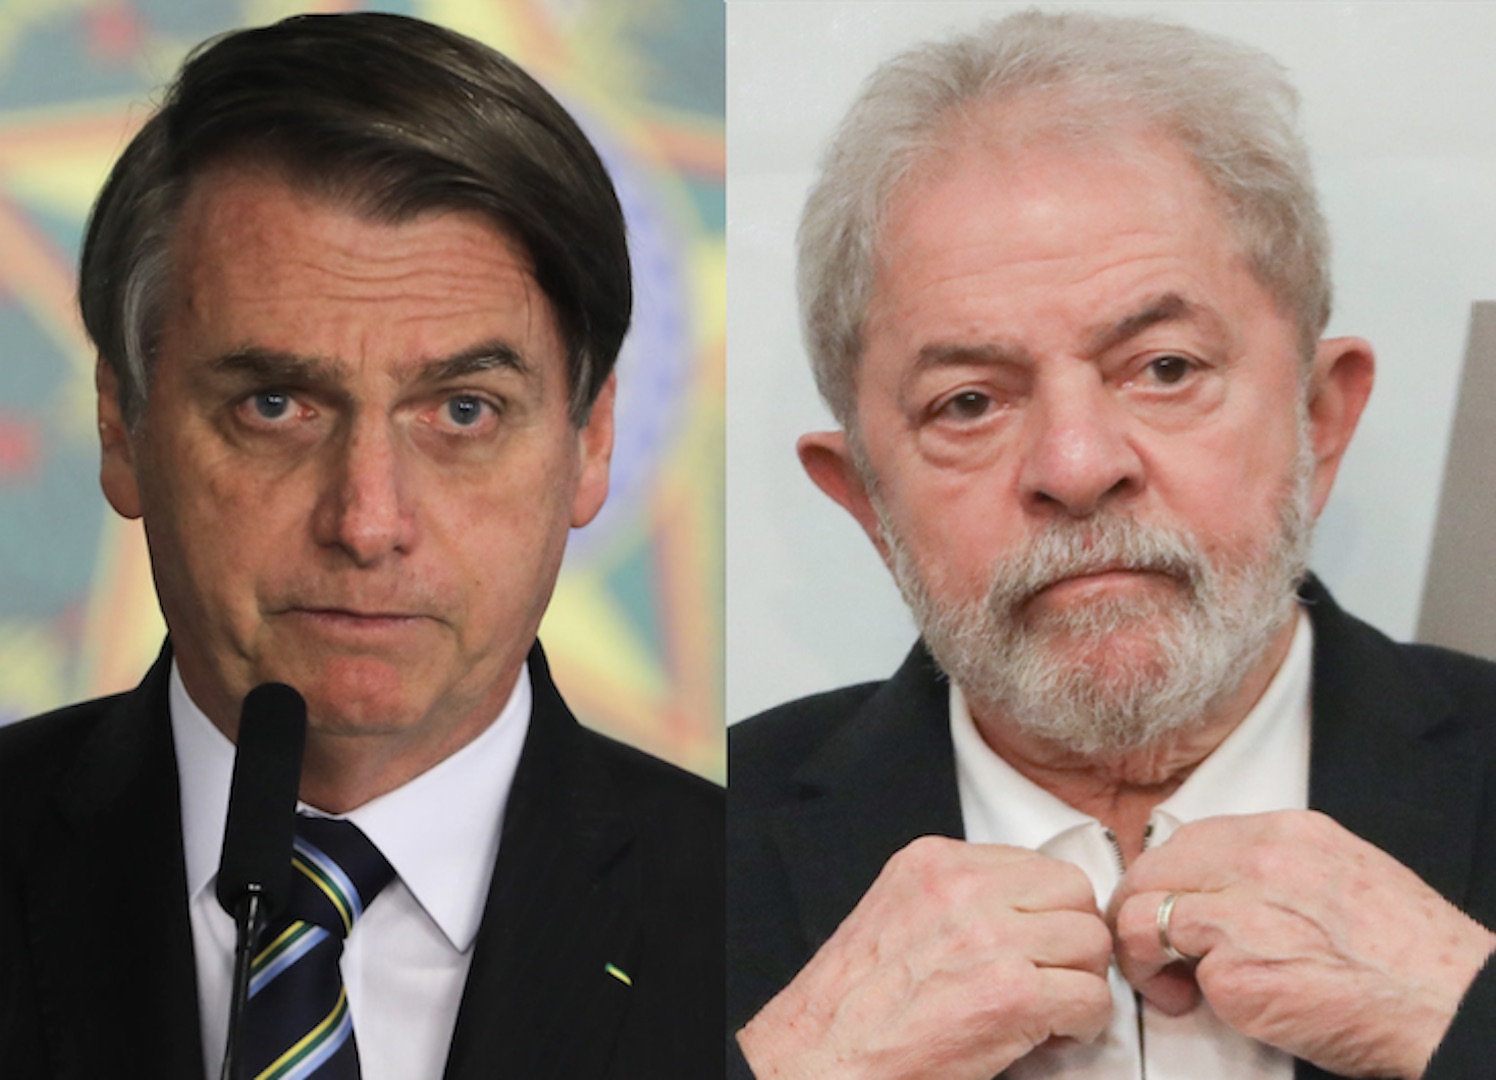 Blow-off between future and former presidential candidates in Brazil.